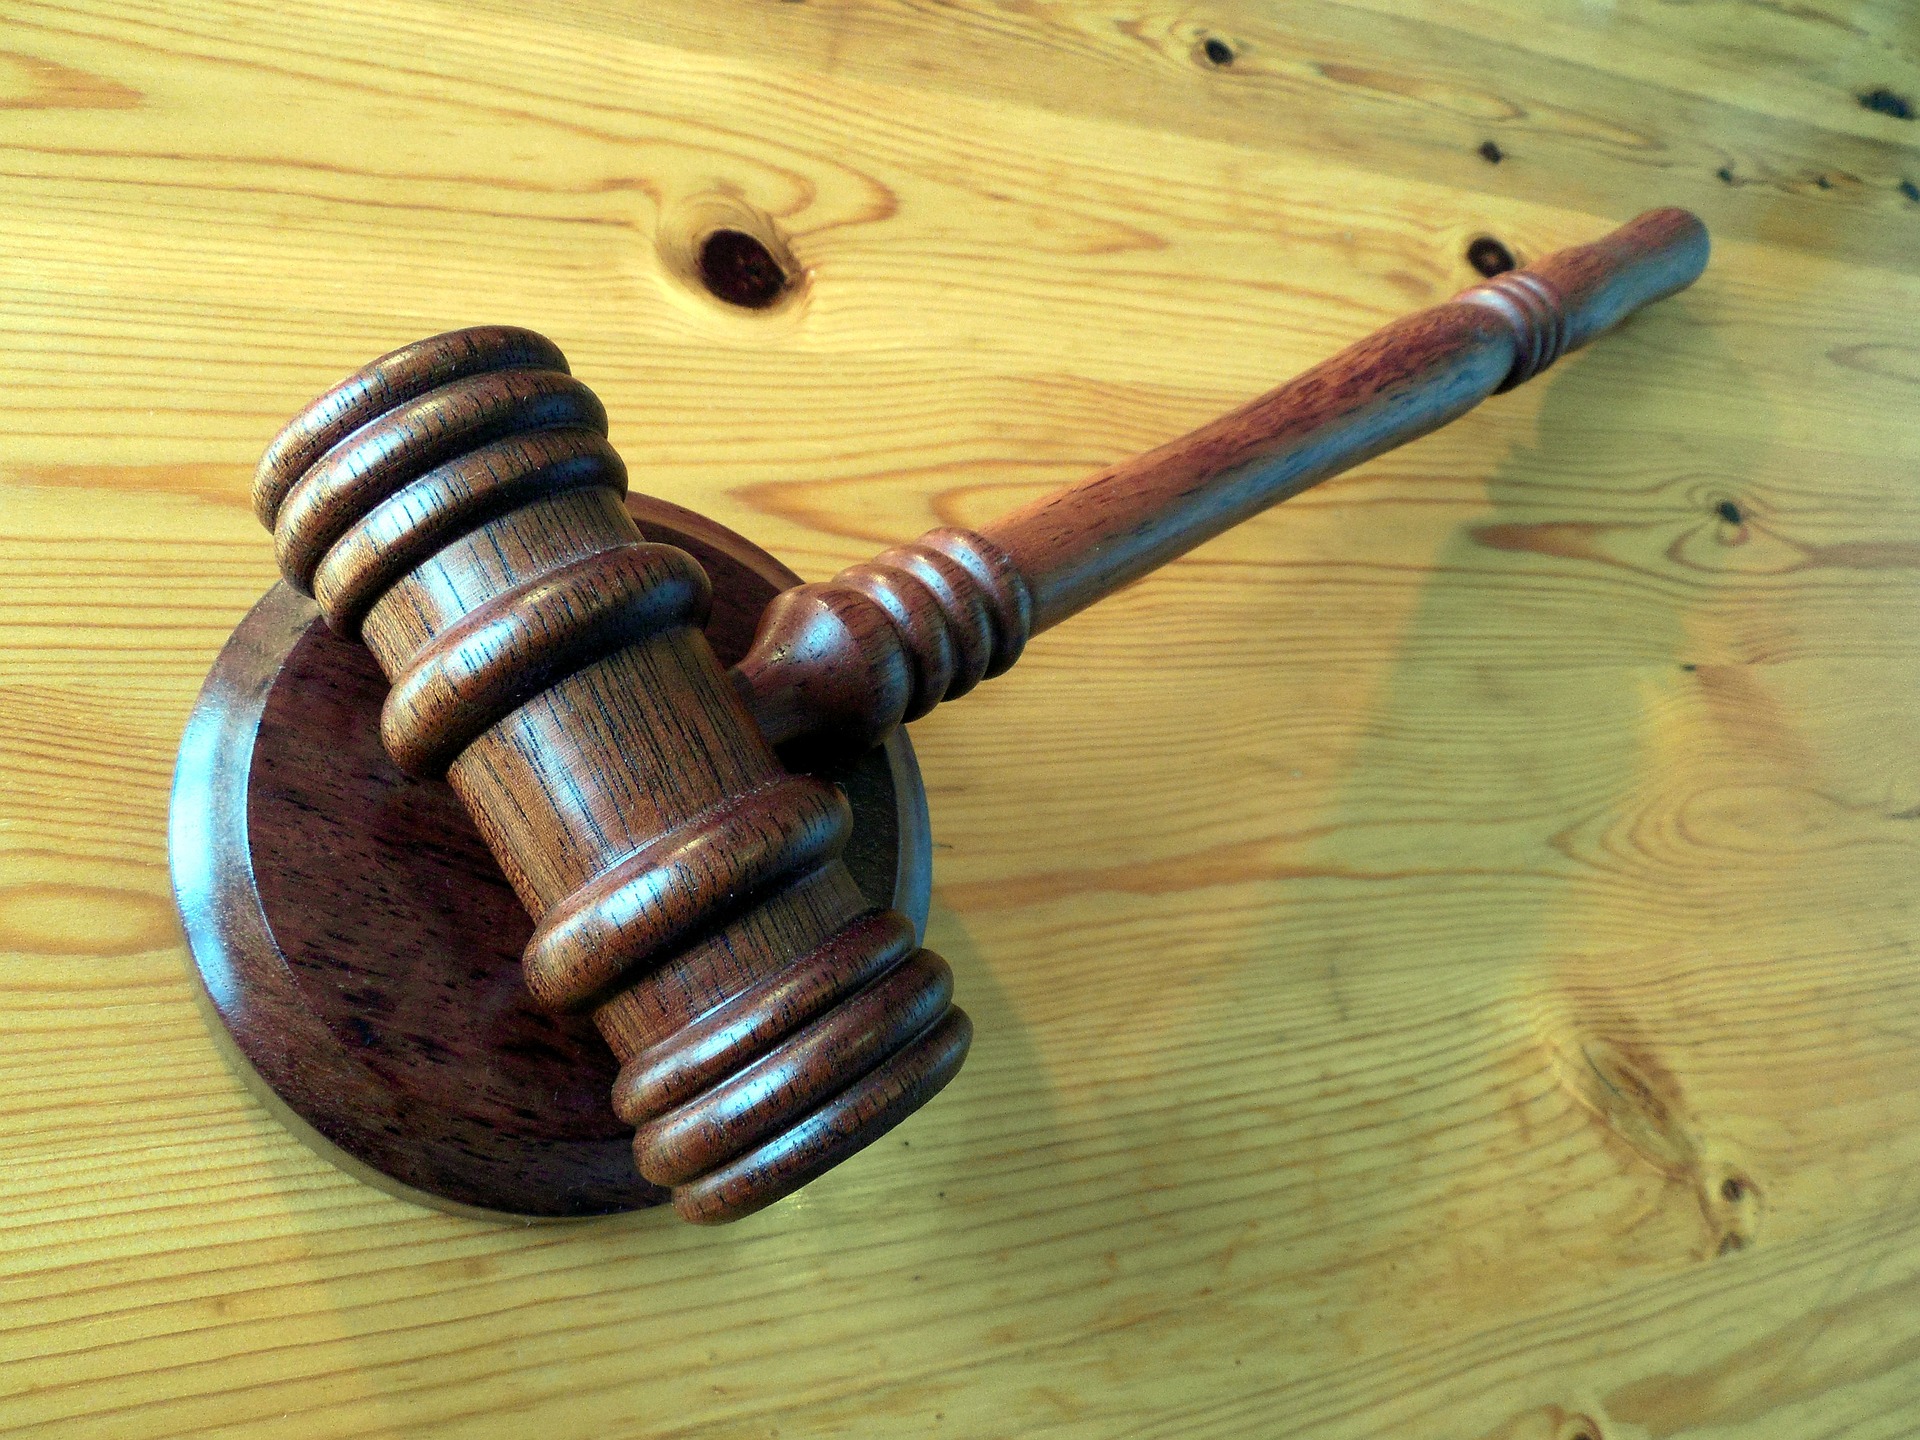 A wooden gavel on a wooden desk; our auction conveyancing solicitors can assist with the legal process of selling a house through auction, whether or online or through an auction house.